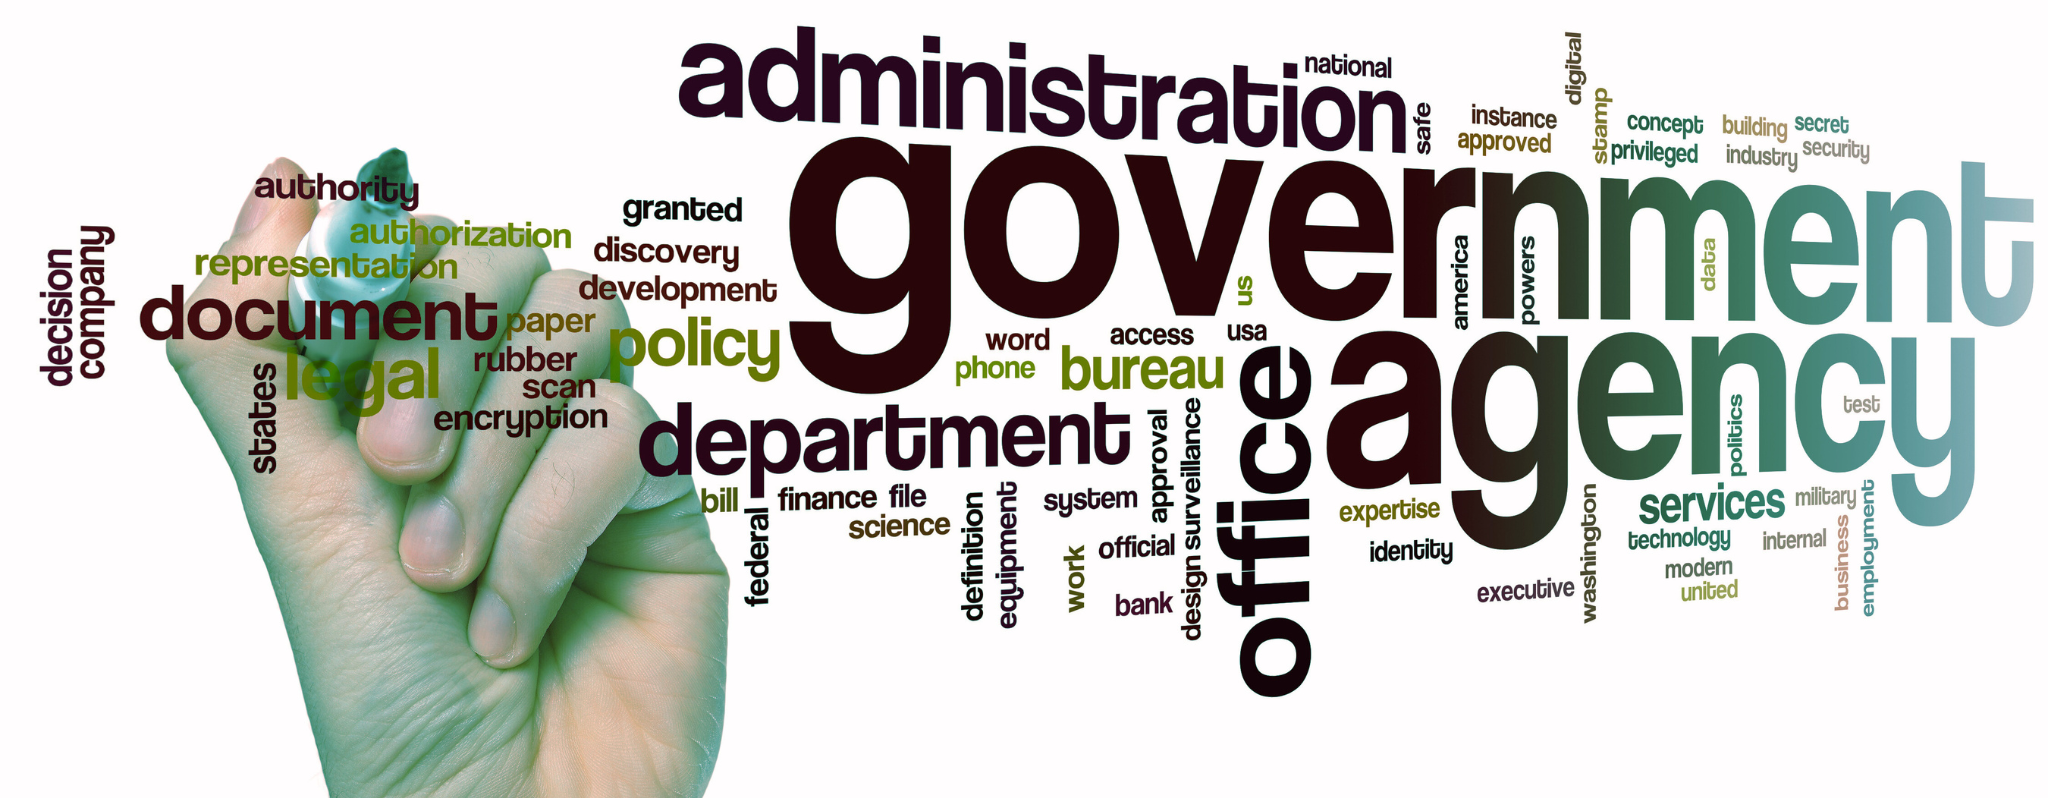 Word cloud around public administration